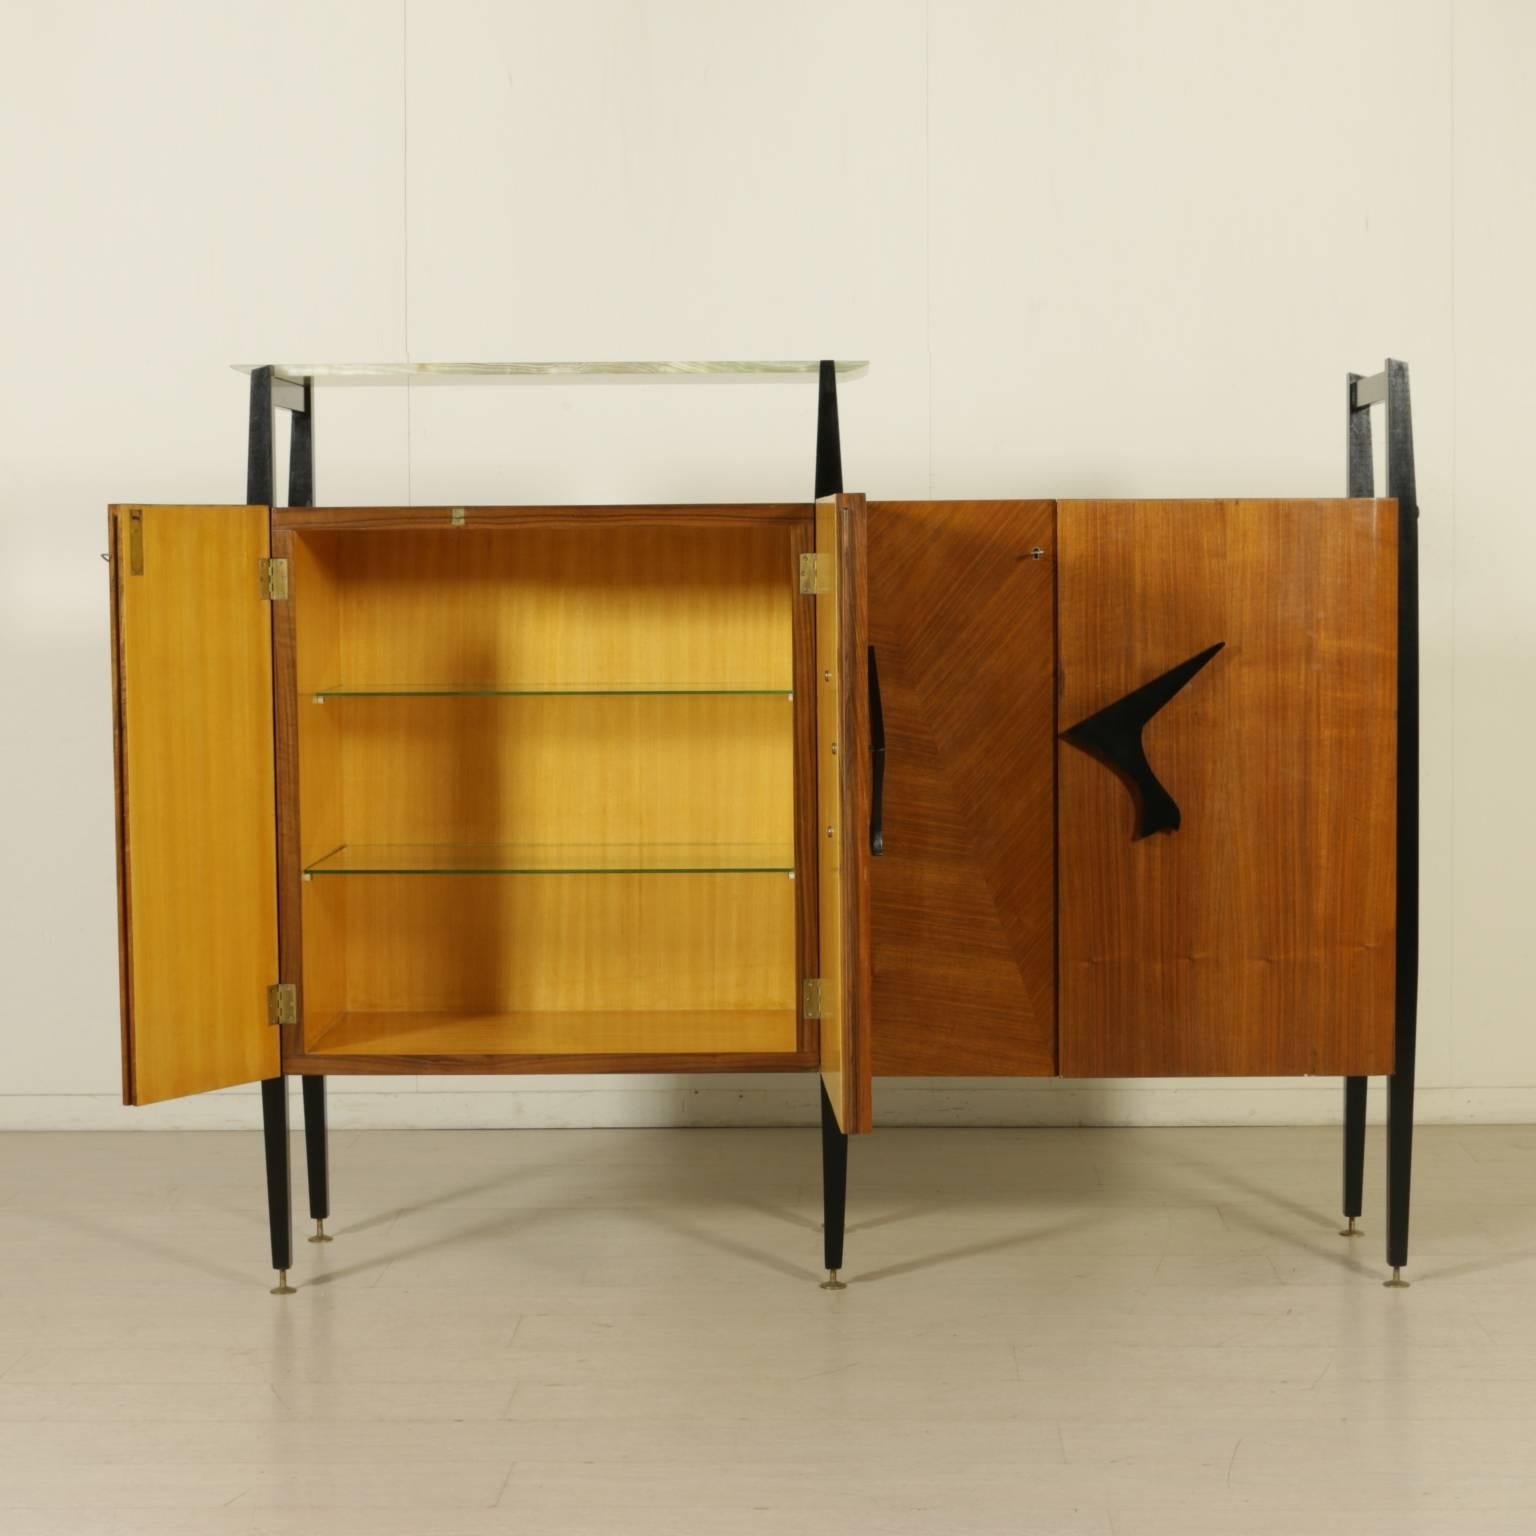 A living room cabinet designed attributed to Luigi Scremin. Lacquered wood uprights with adjustable brass feet. Mahogany veneer, maple veneered interior with glass shelves, onyx upper shelf. Manufactured in Italy, 1950s.